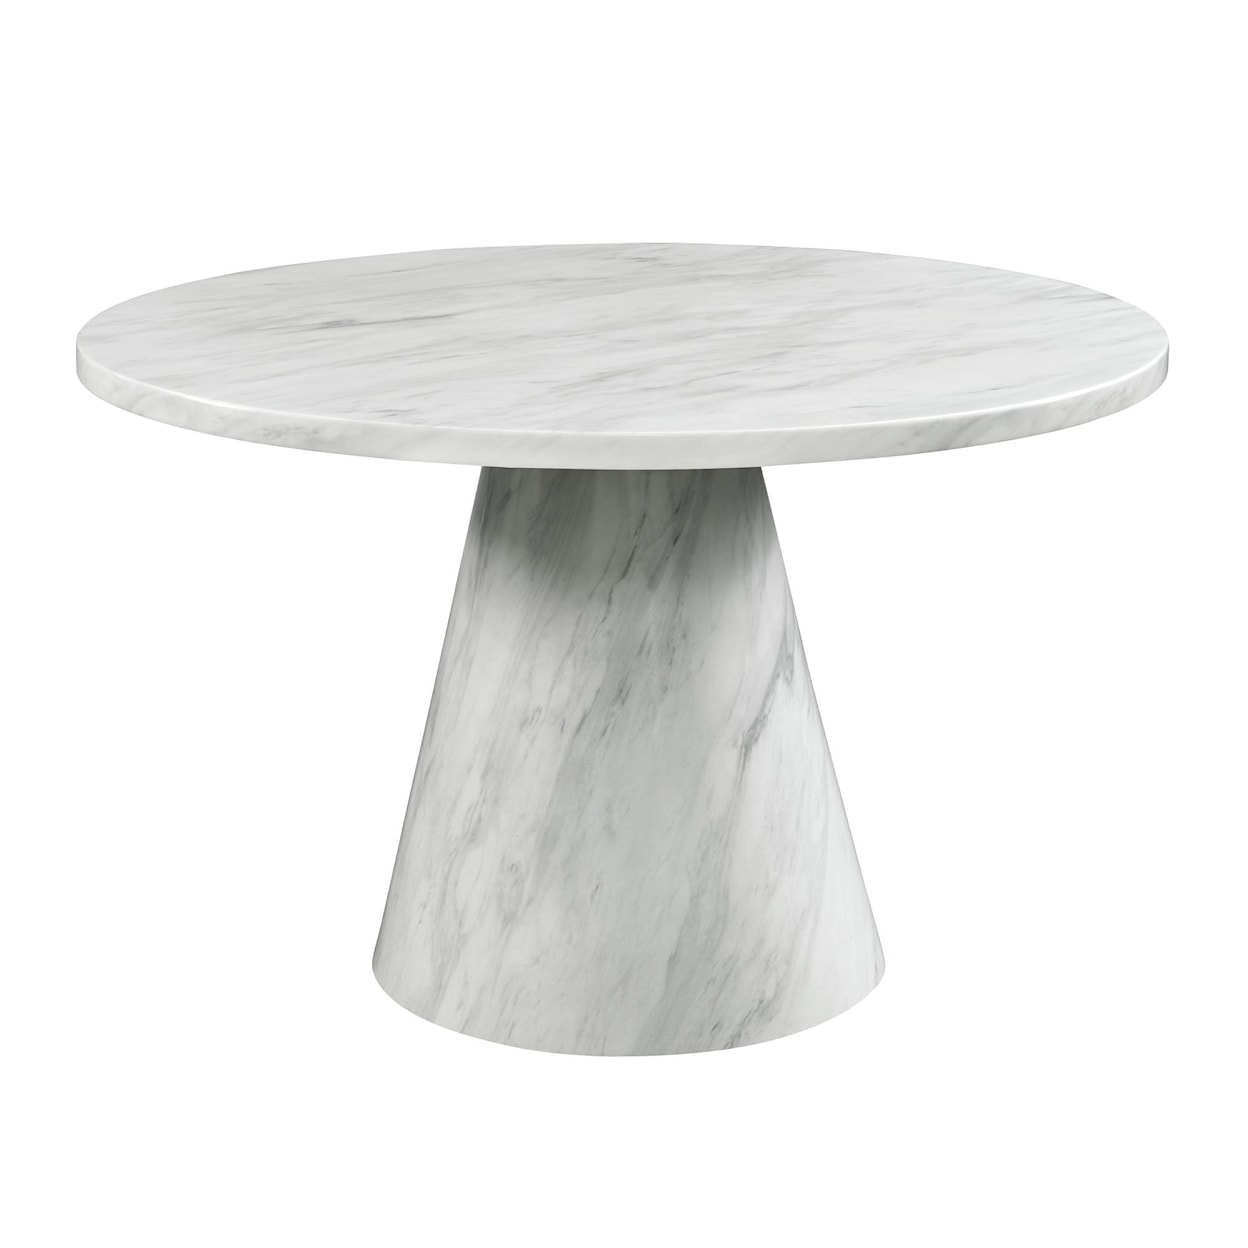 Elements International Bellini Round Dining Table